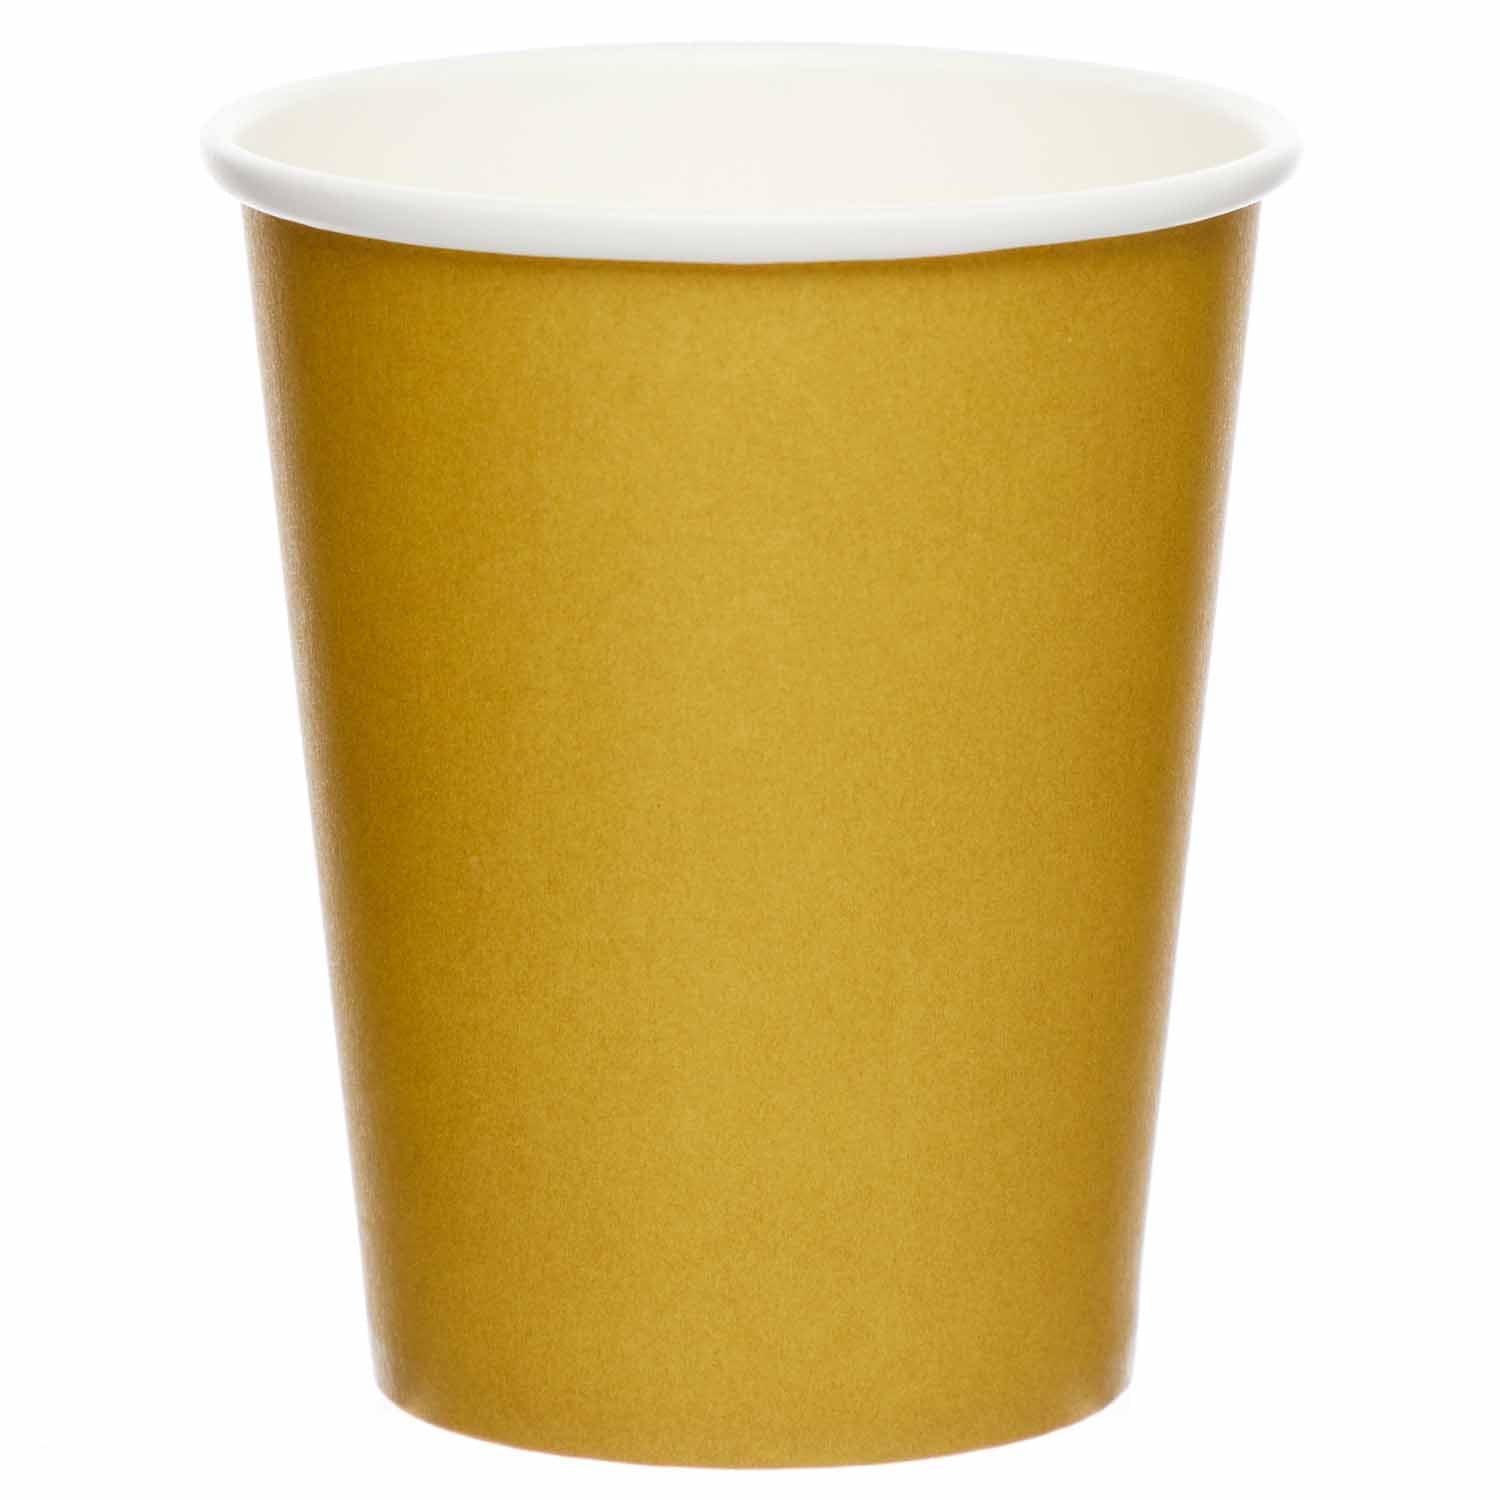 Gold Paper Party Cups 8pk